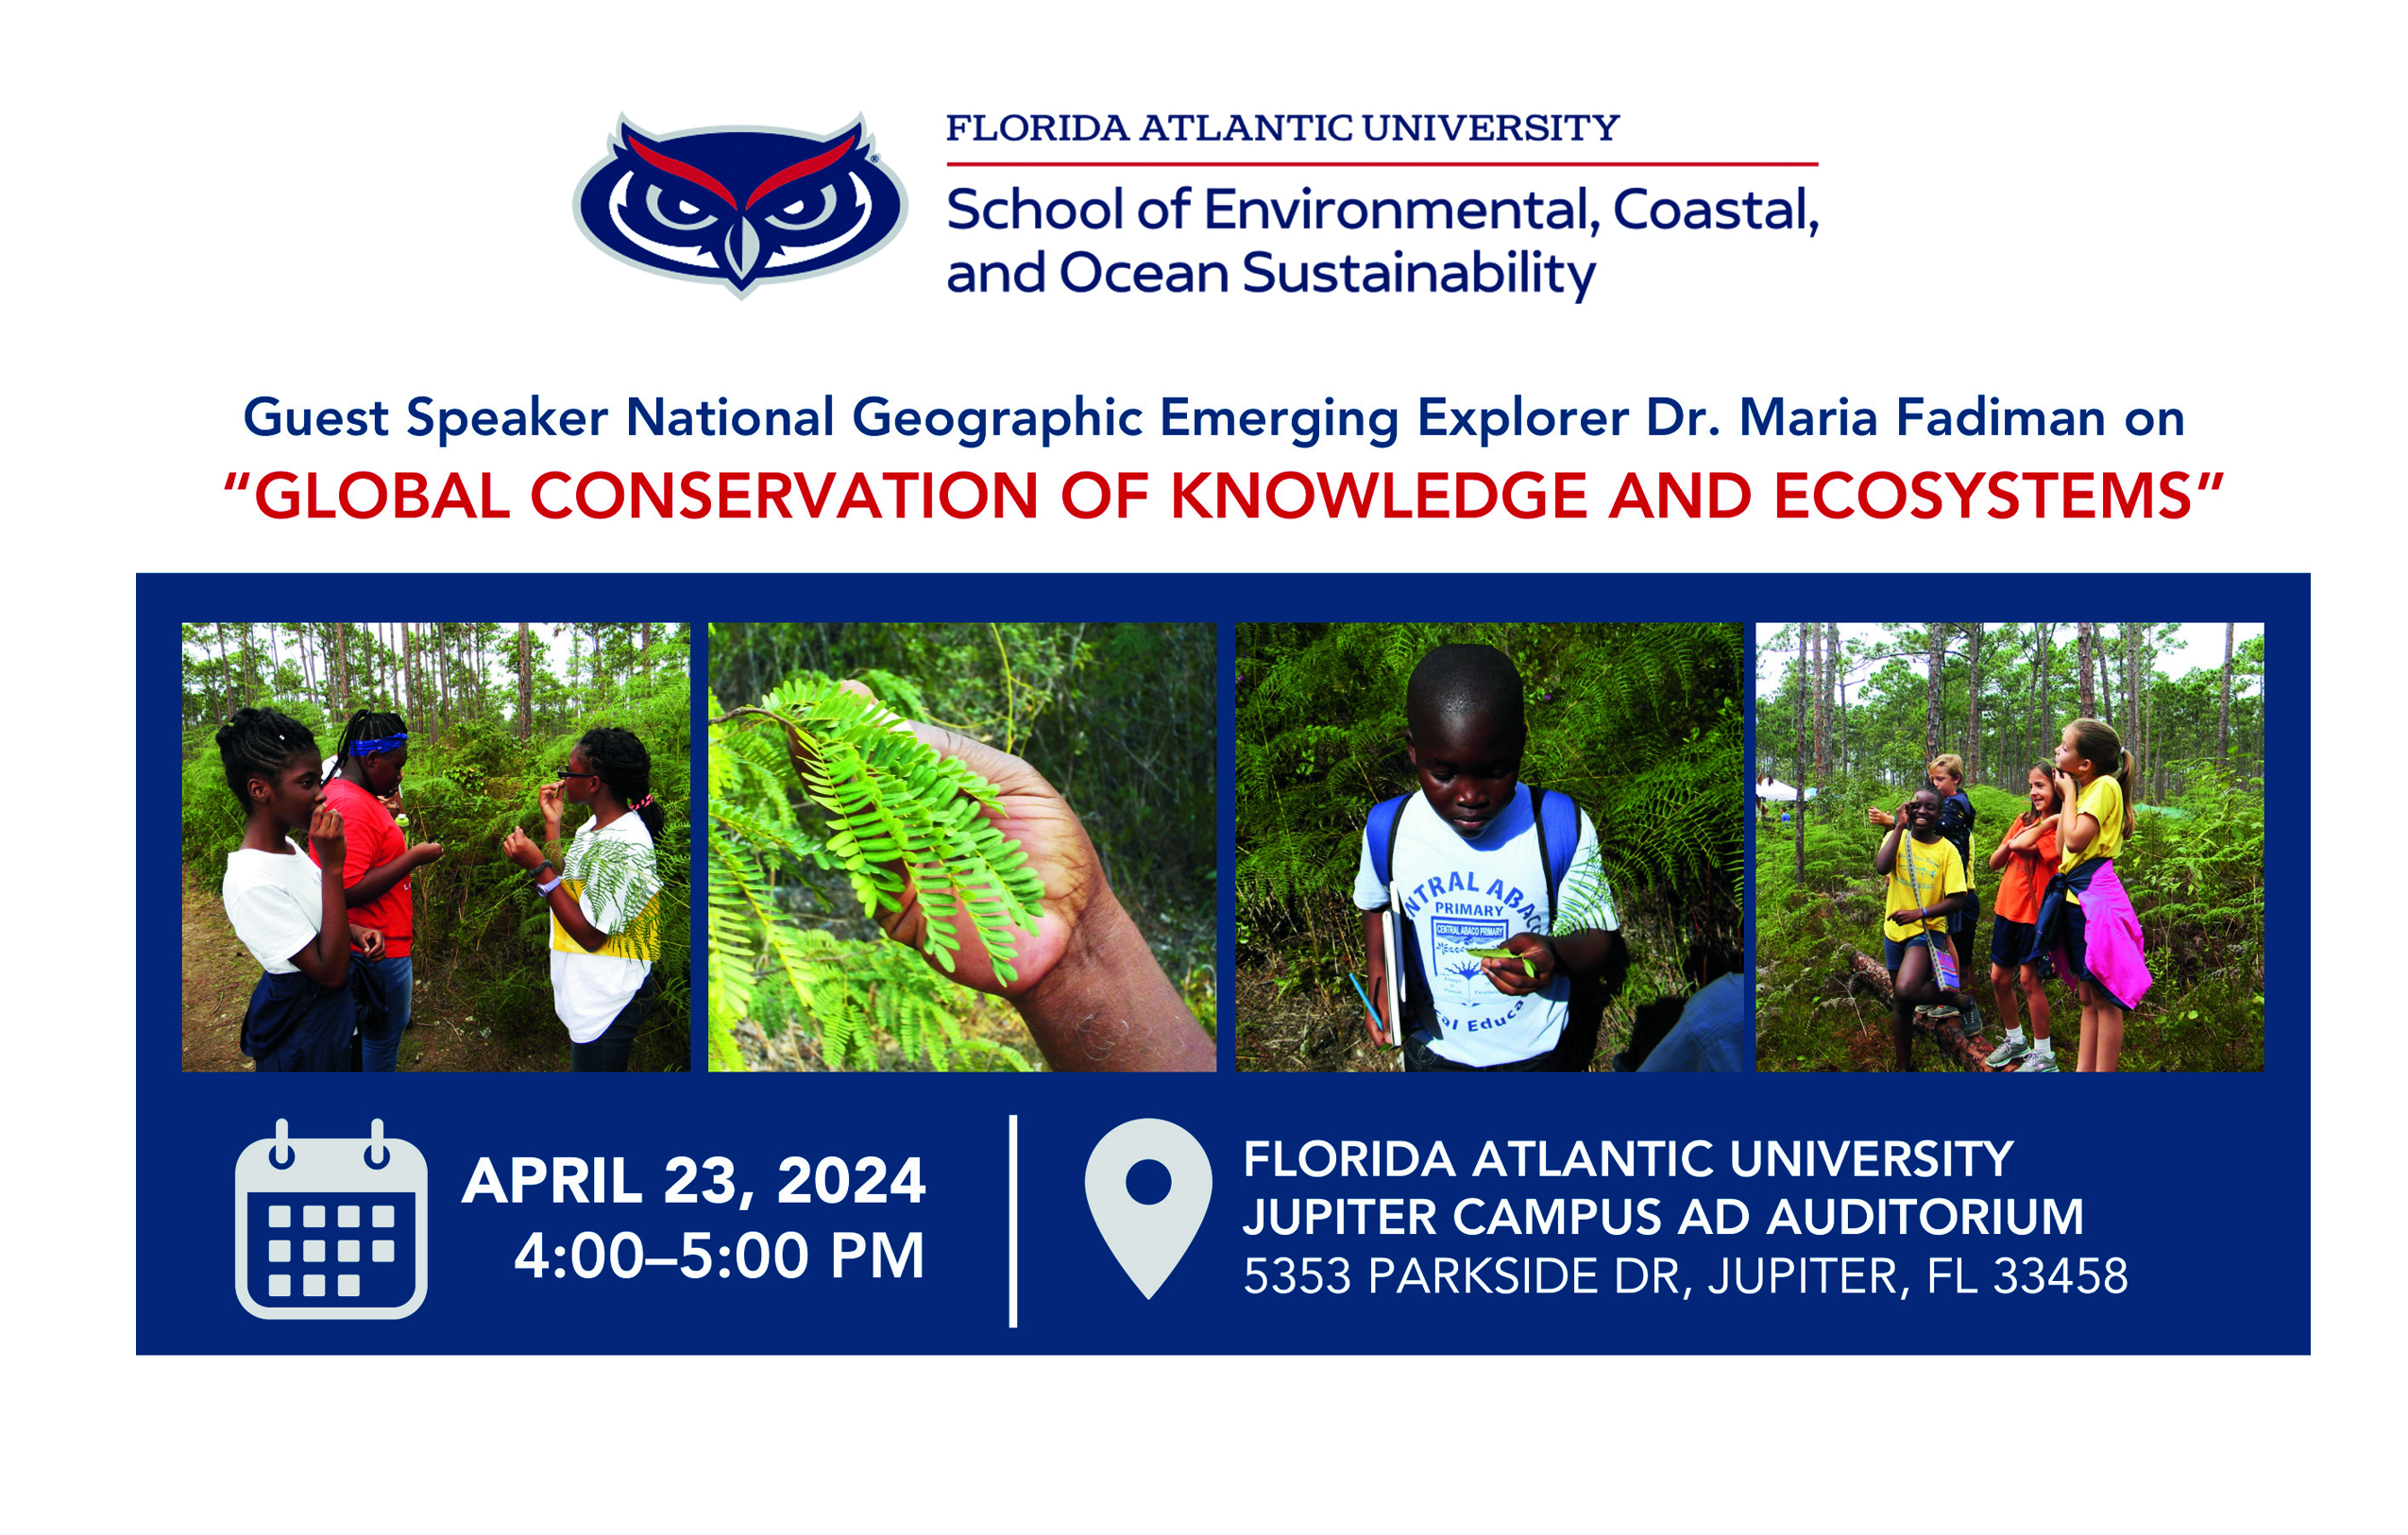 Global Conservation of Knowledge and Ecosystems Public Lecture 